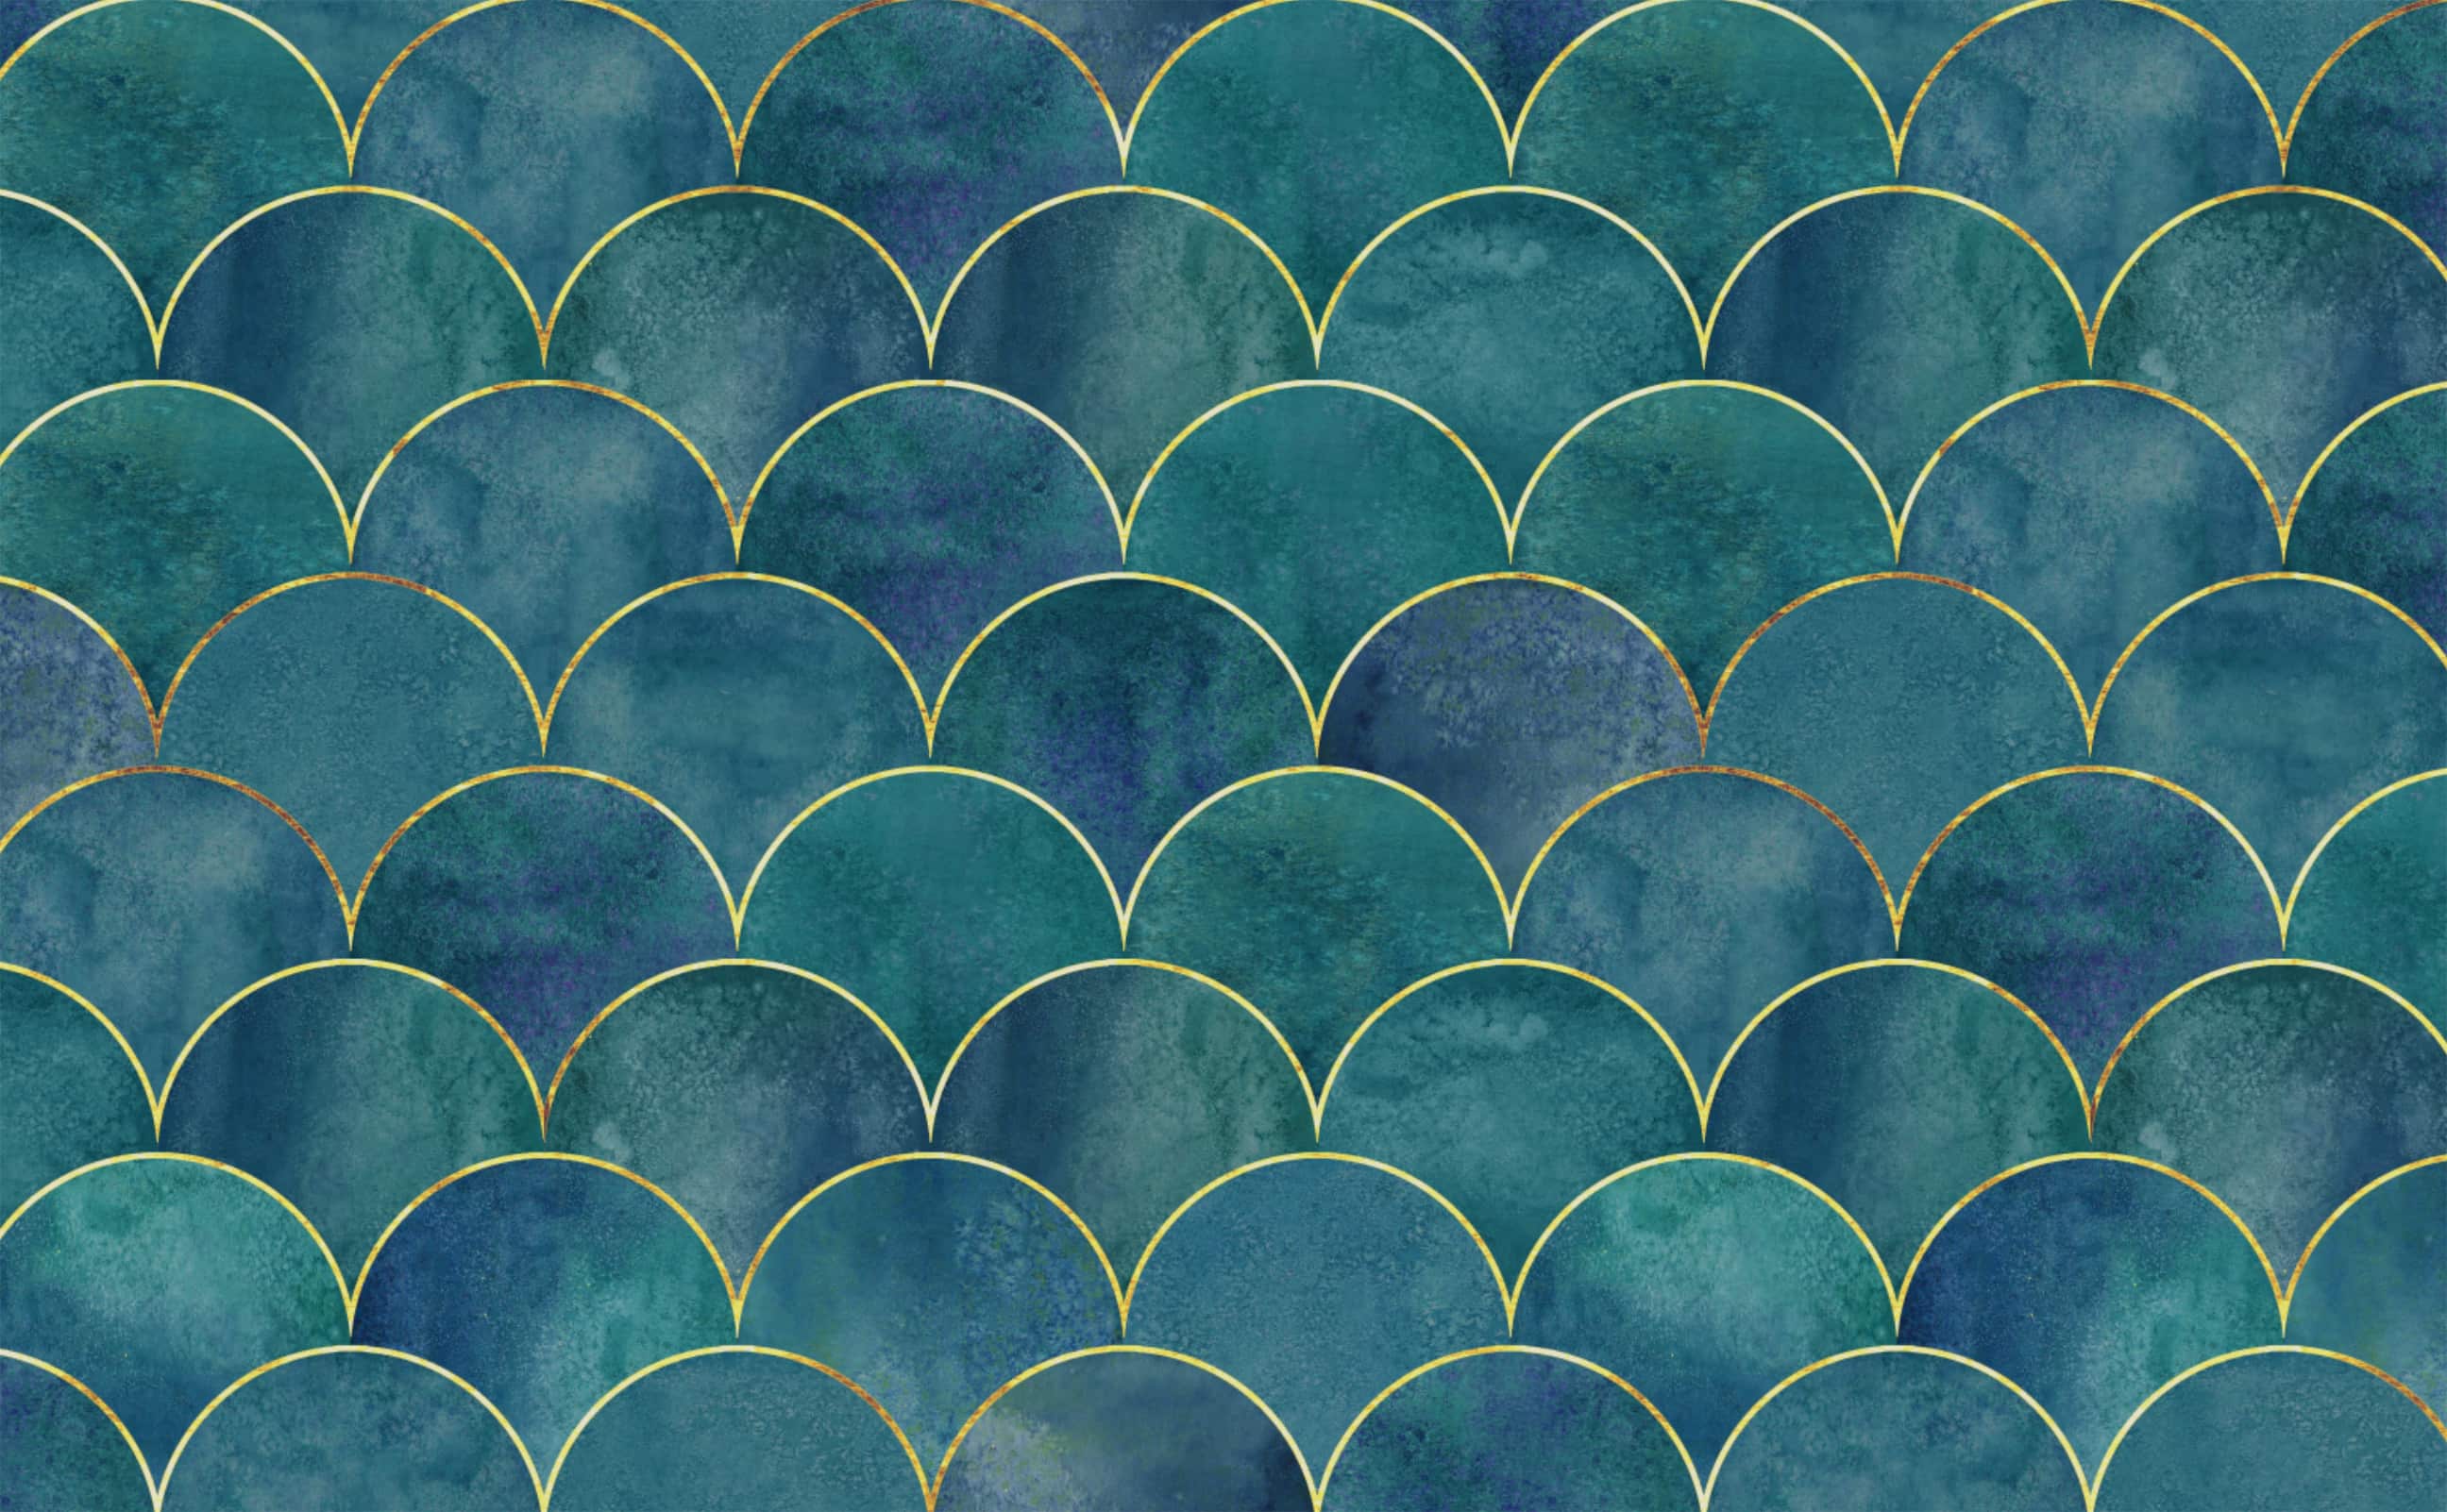 Blue and Gold Luxurious Art Deco Wallpaper, Classic Wall Mural